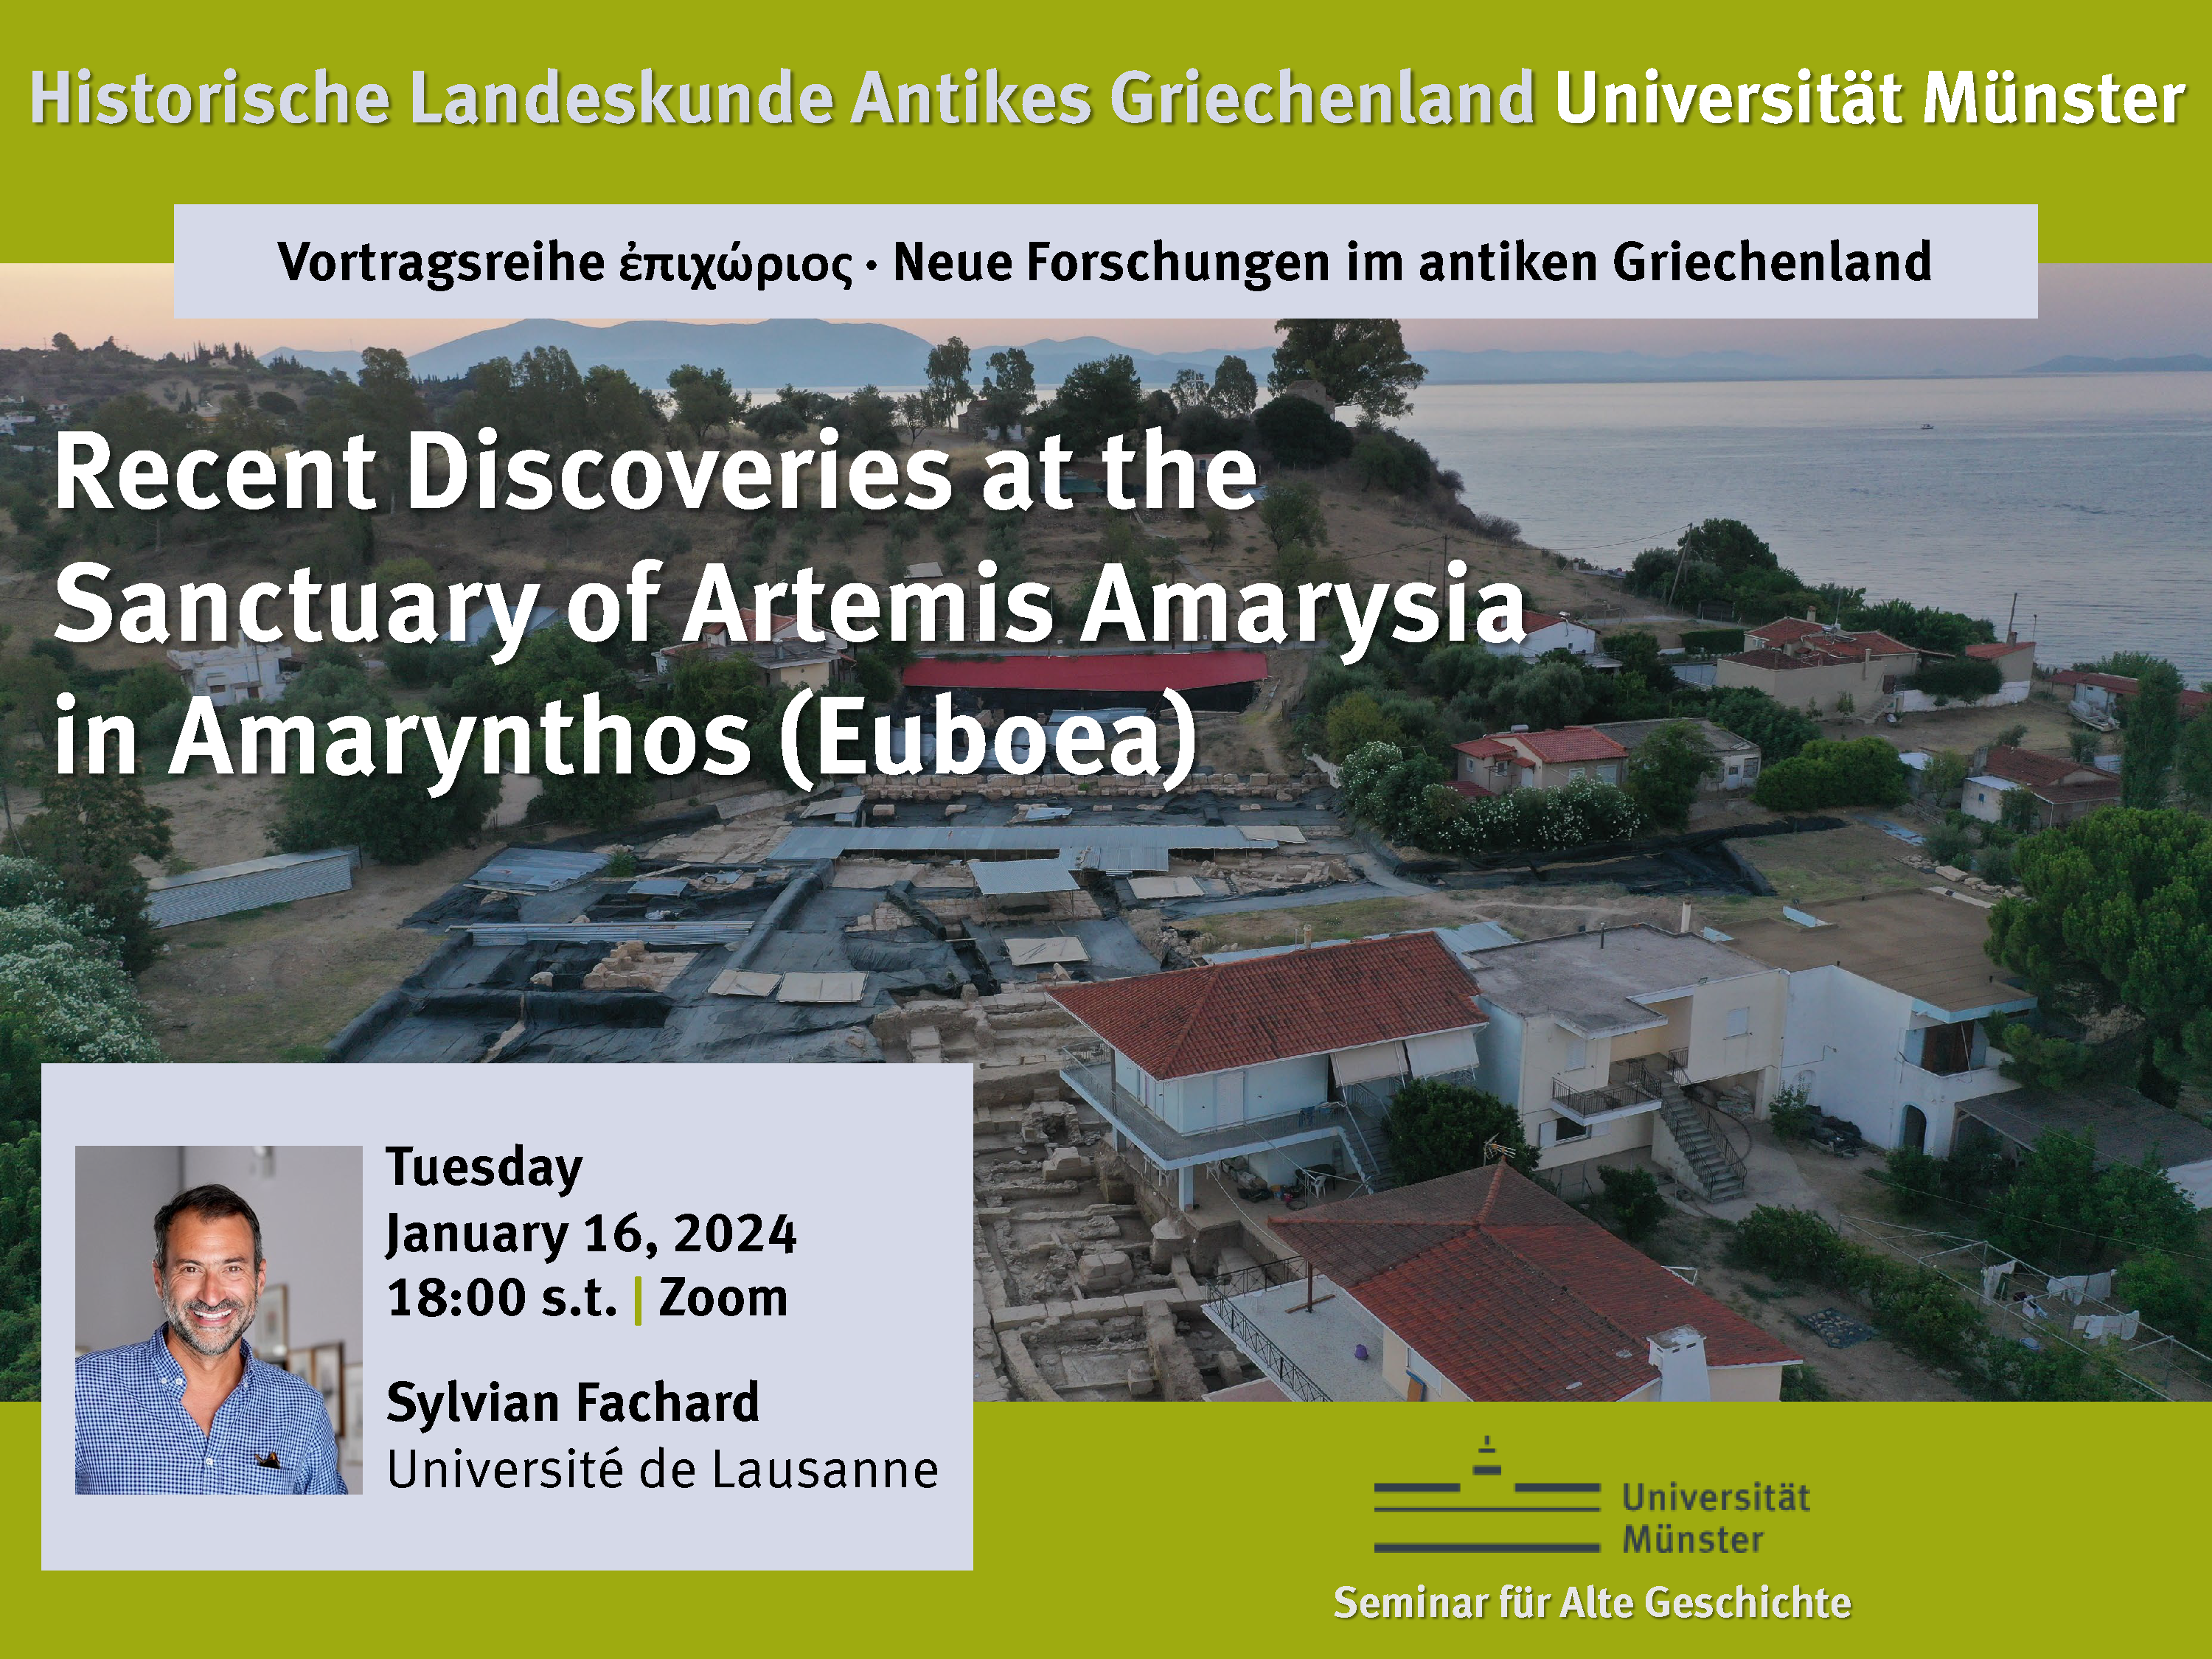 Poster for Epichorios lecture: Fachard - Recent Discoveries at the Sanctuary of Artemis Amarysiain Amarynthos (Euboea)